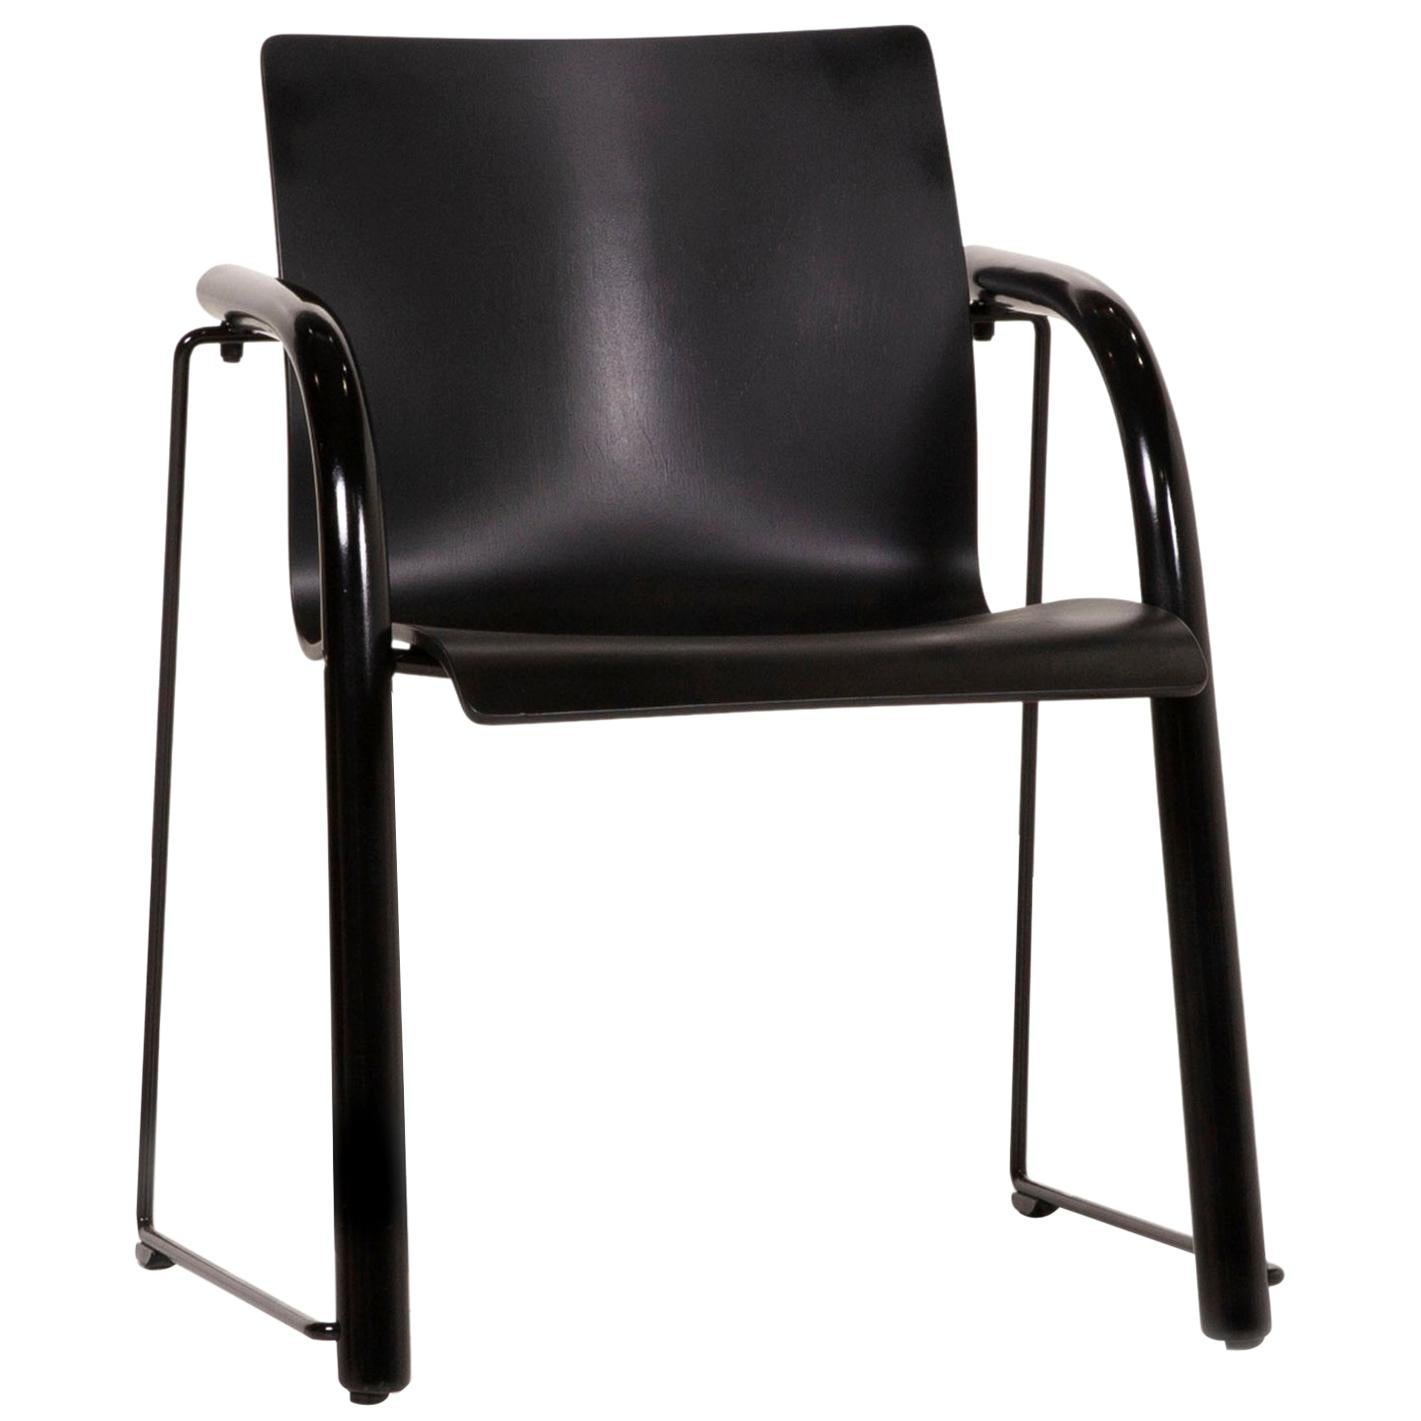 Thonet S320 Wood Chair Black For Sale